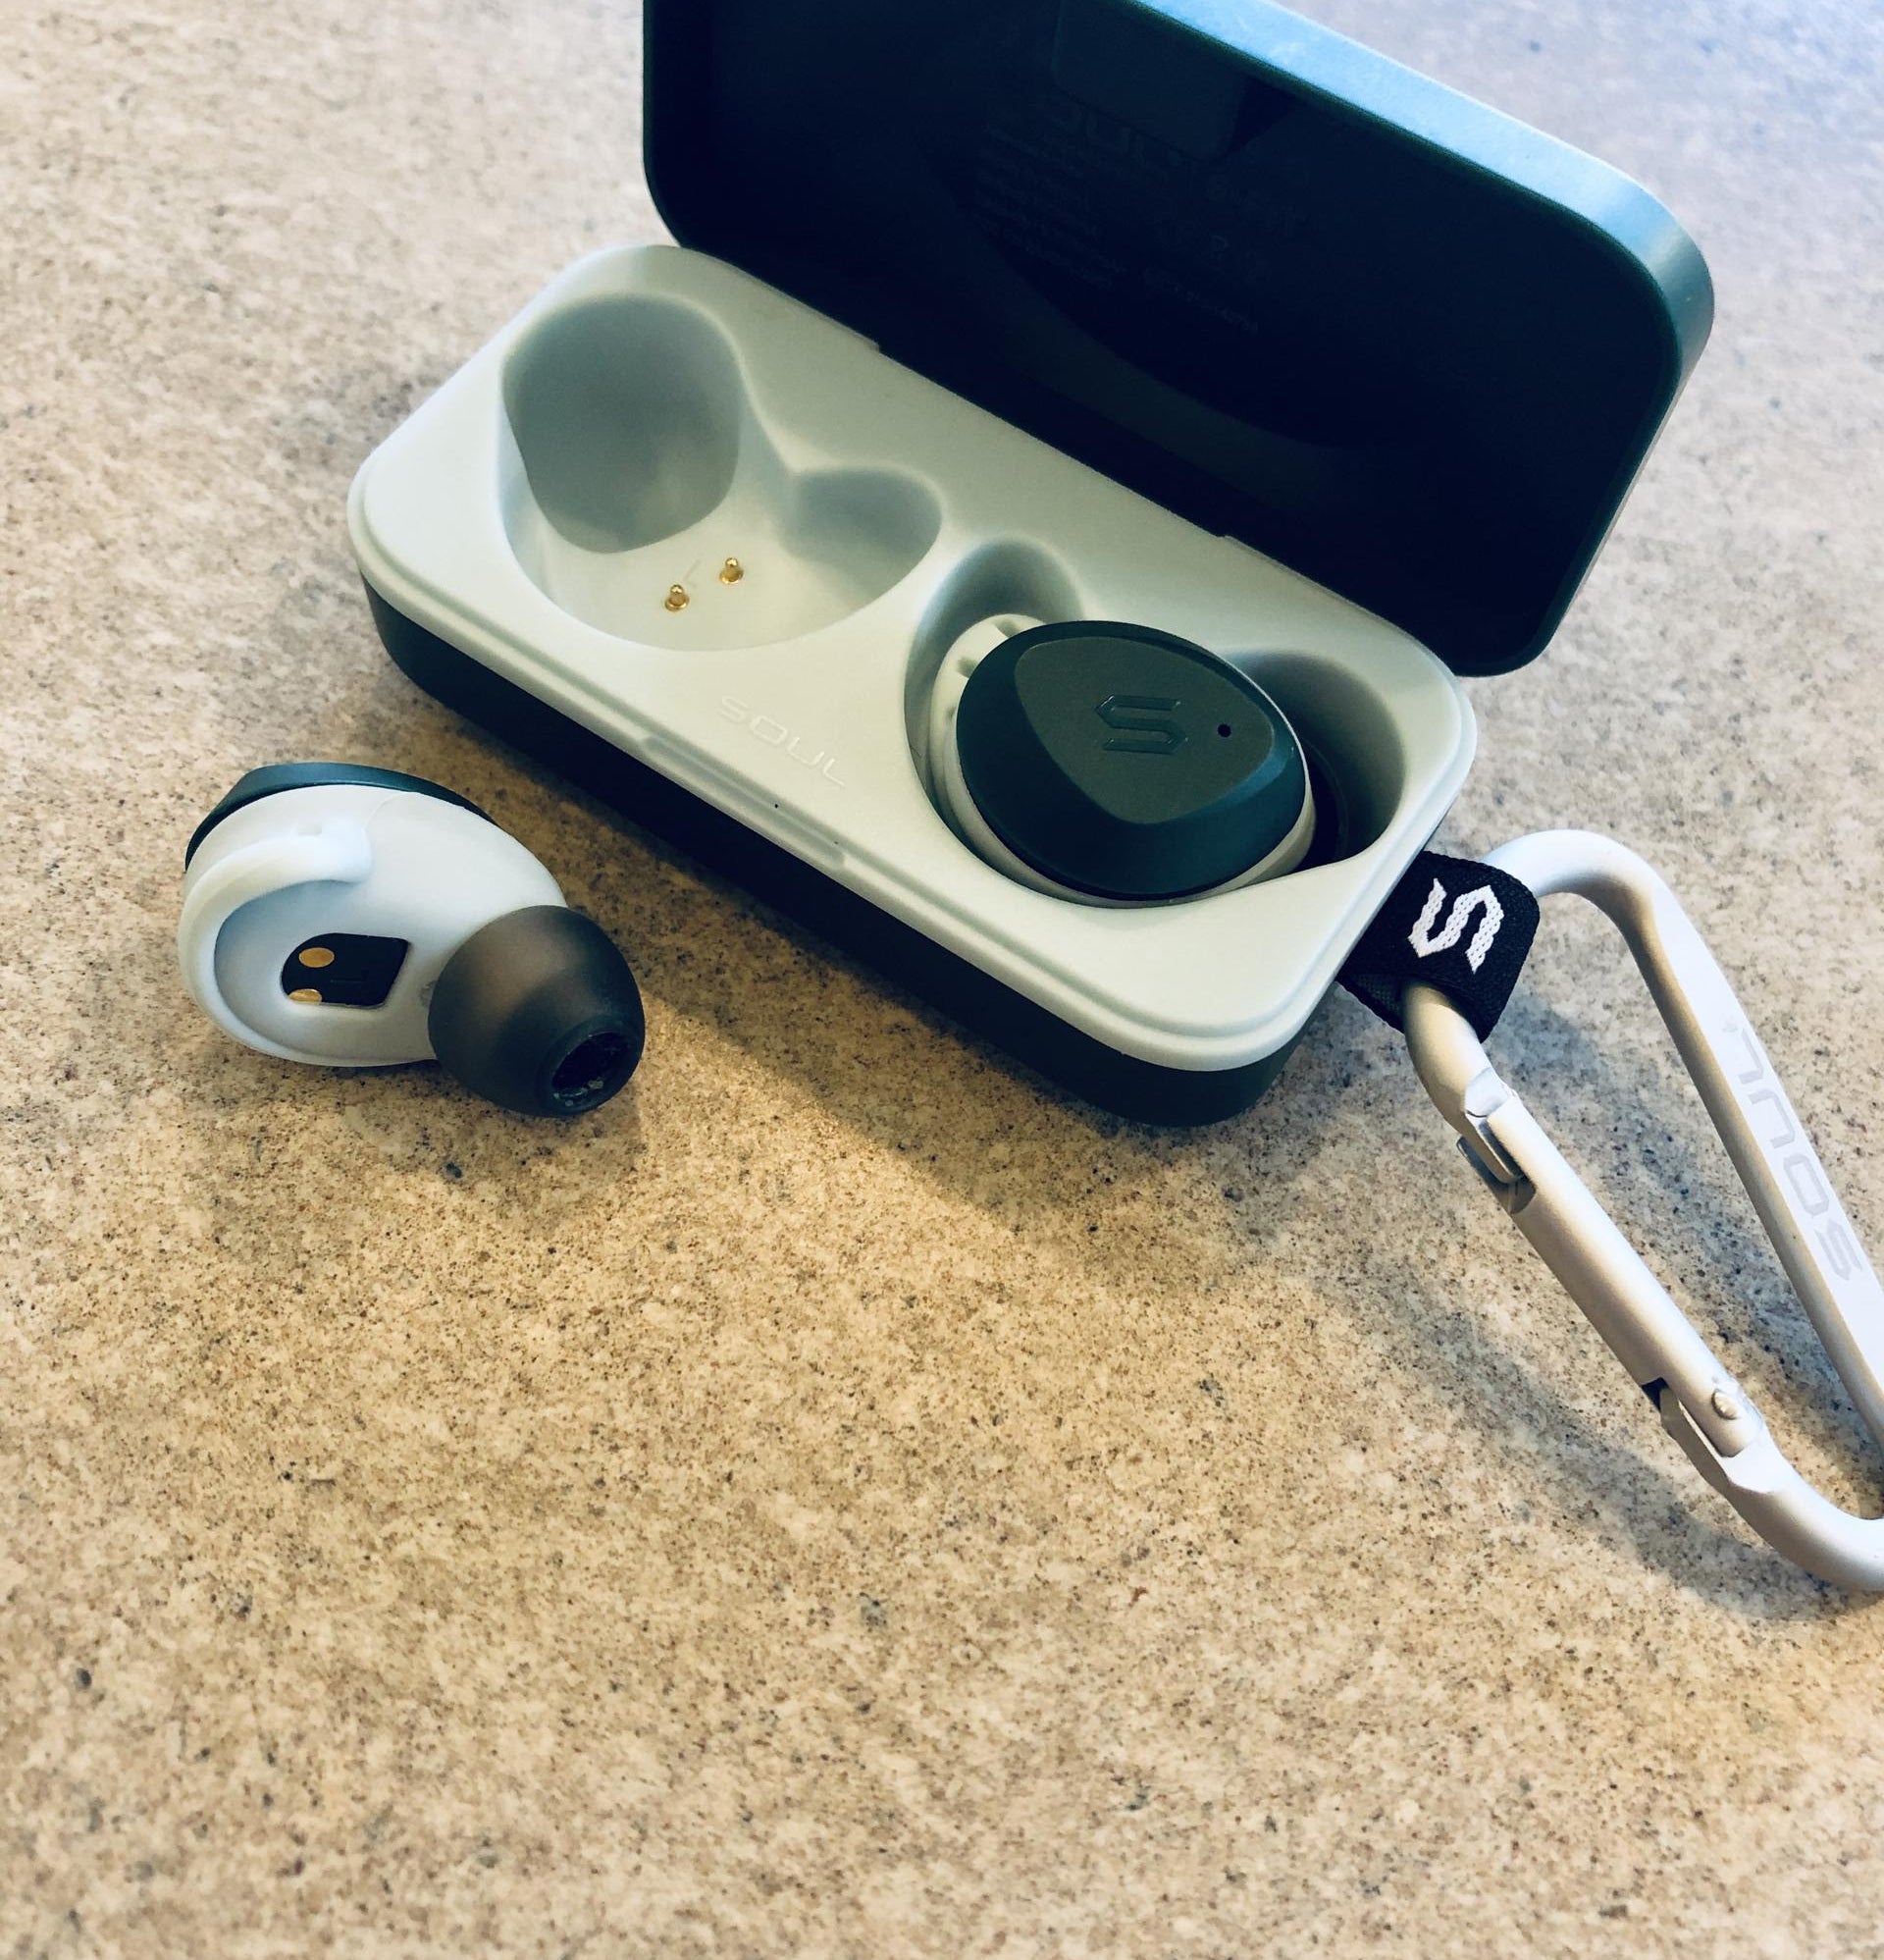 small wireless earbuds in their charging base attached to a carabiner